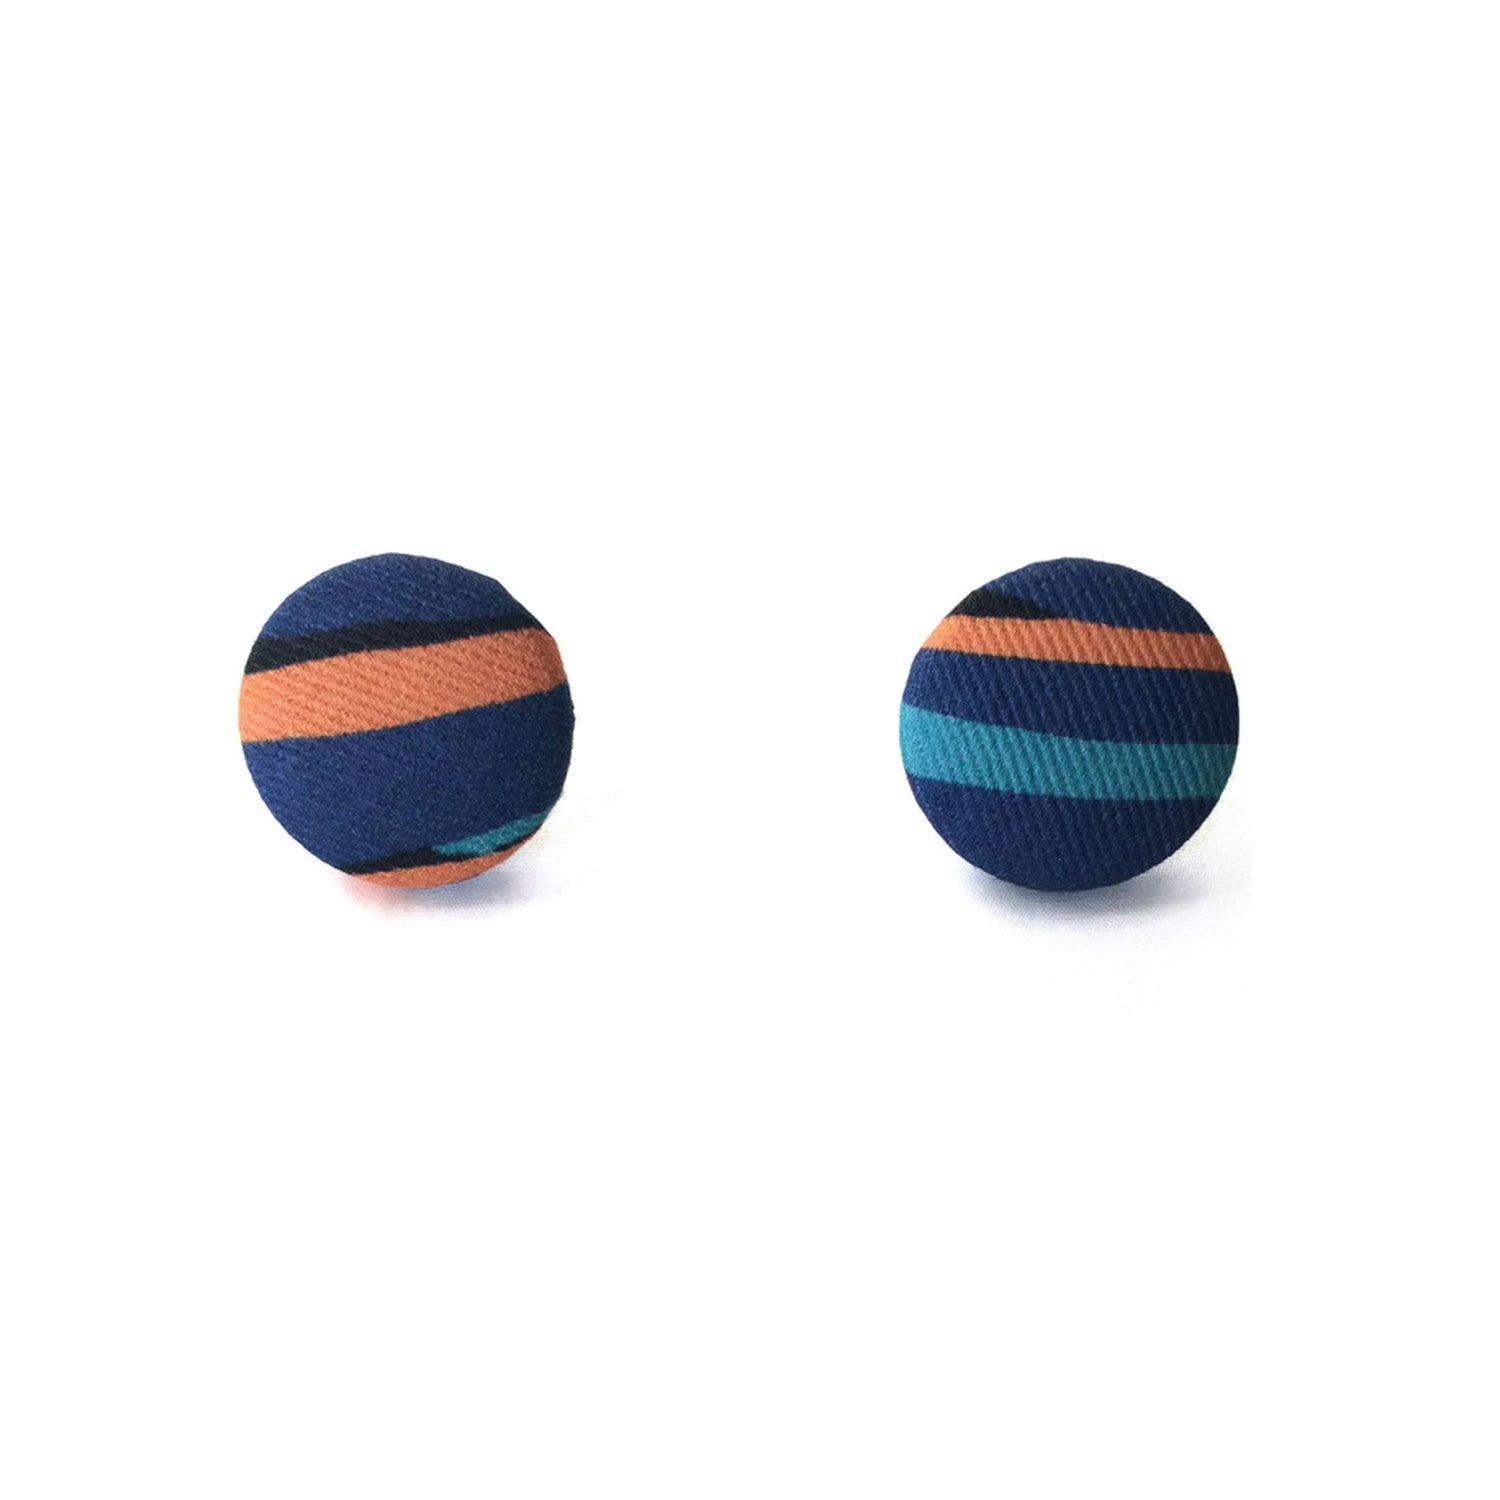 Fabric Covered Button Earrings With Cami Pattern - OlaOla